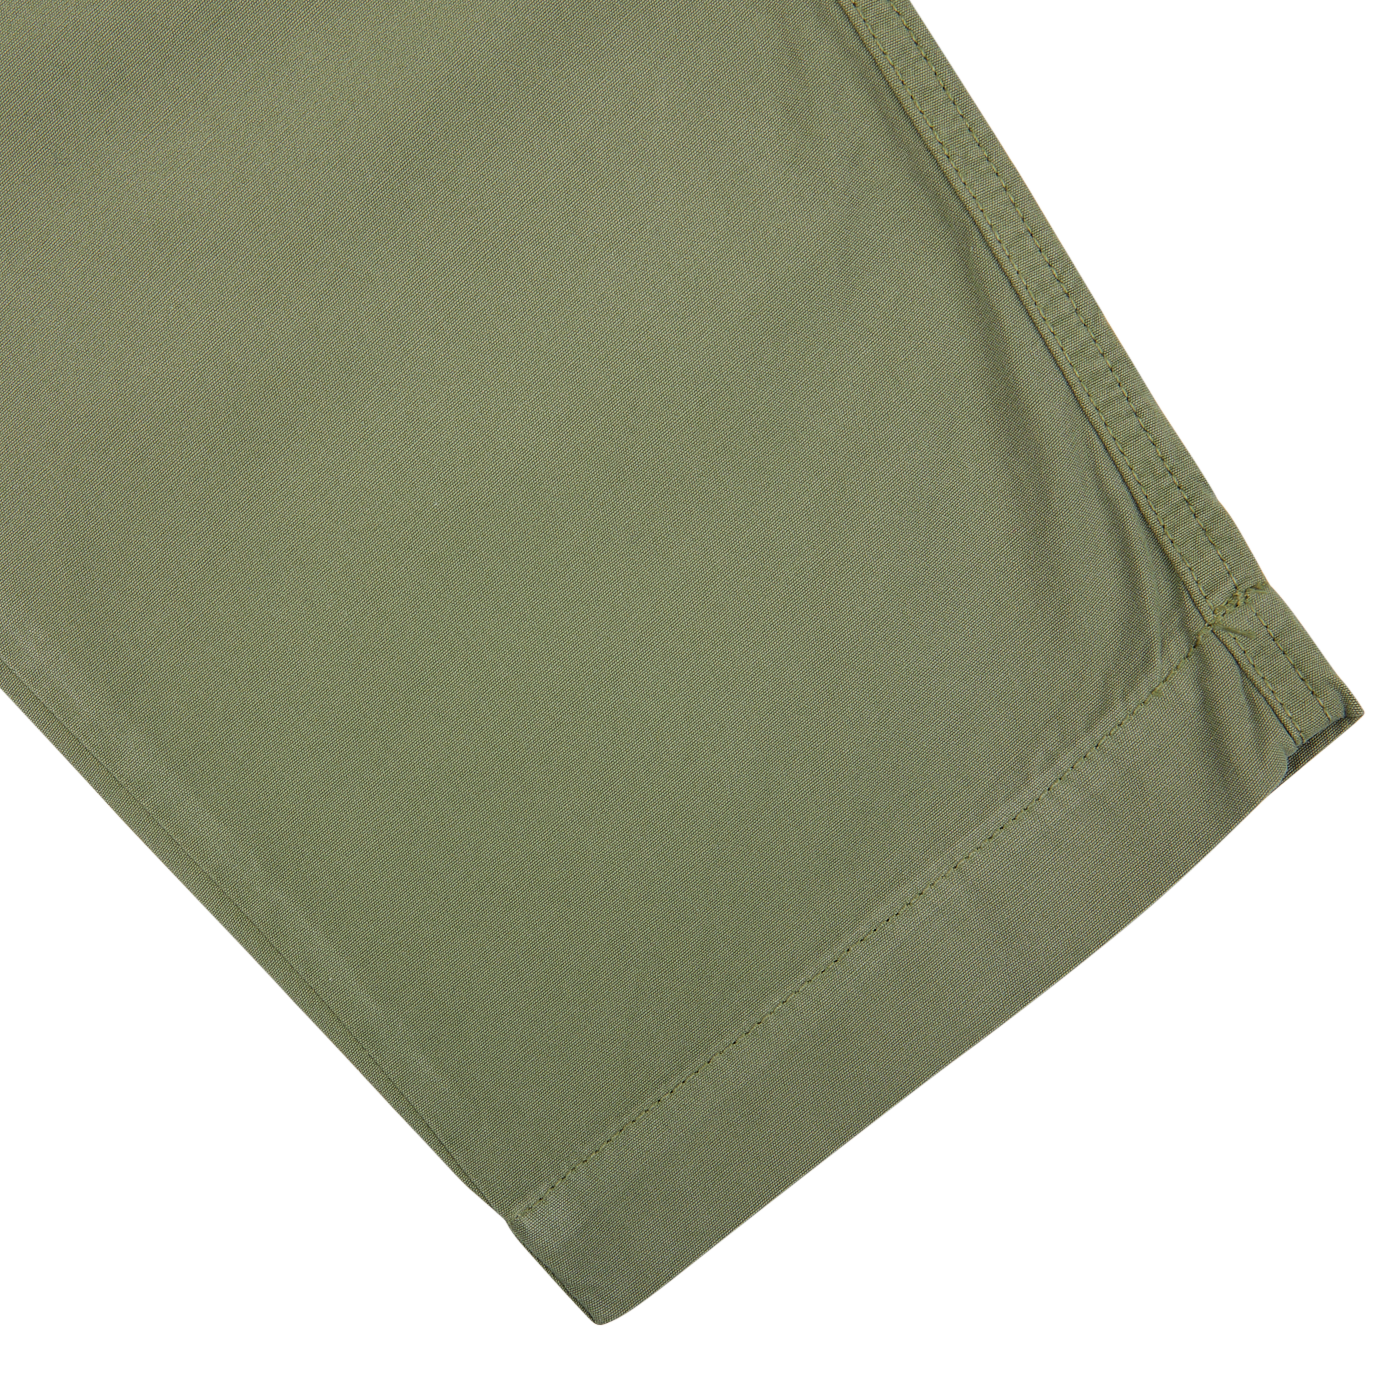 Green Birch Green Cotton Summer Canvas Military Chinos fabric with double-stitch hem on a white background by Universal Works.